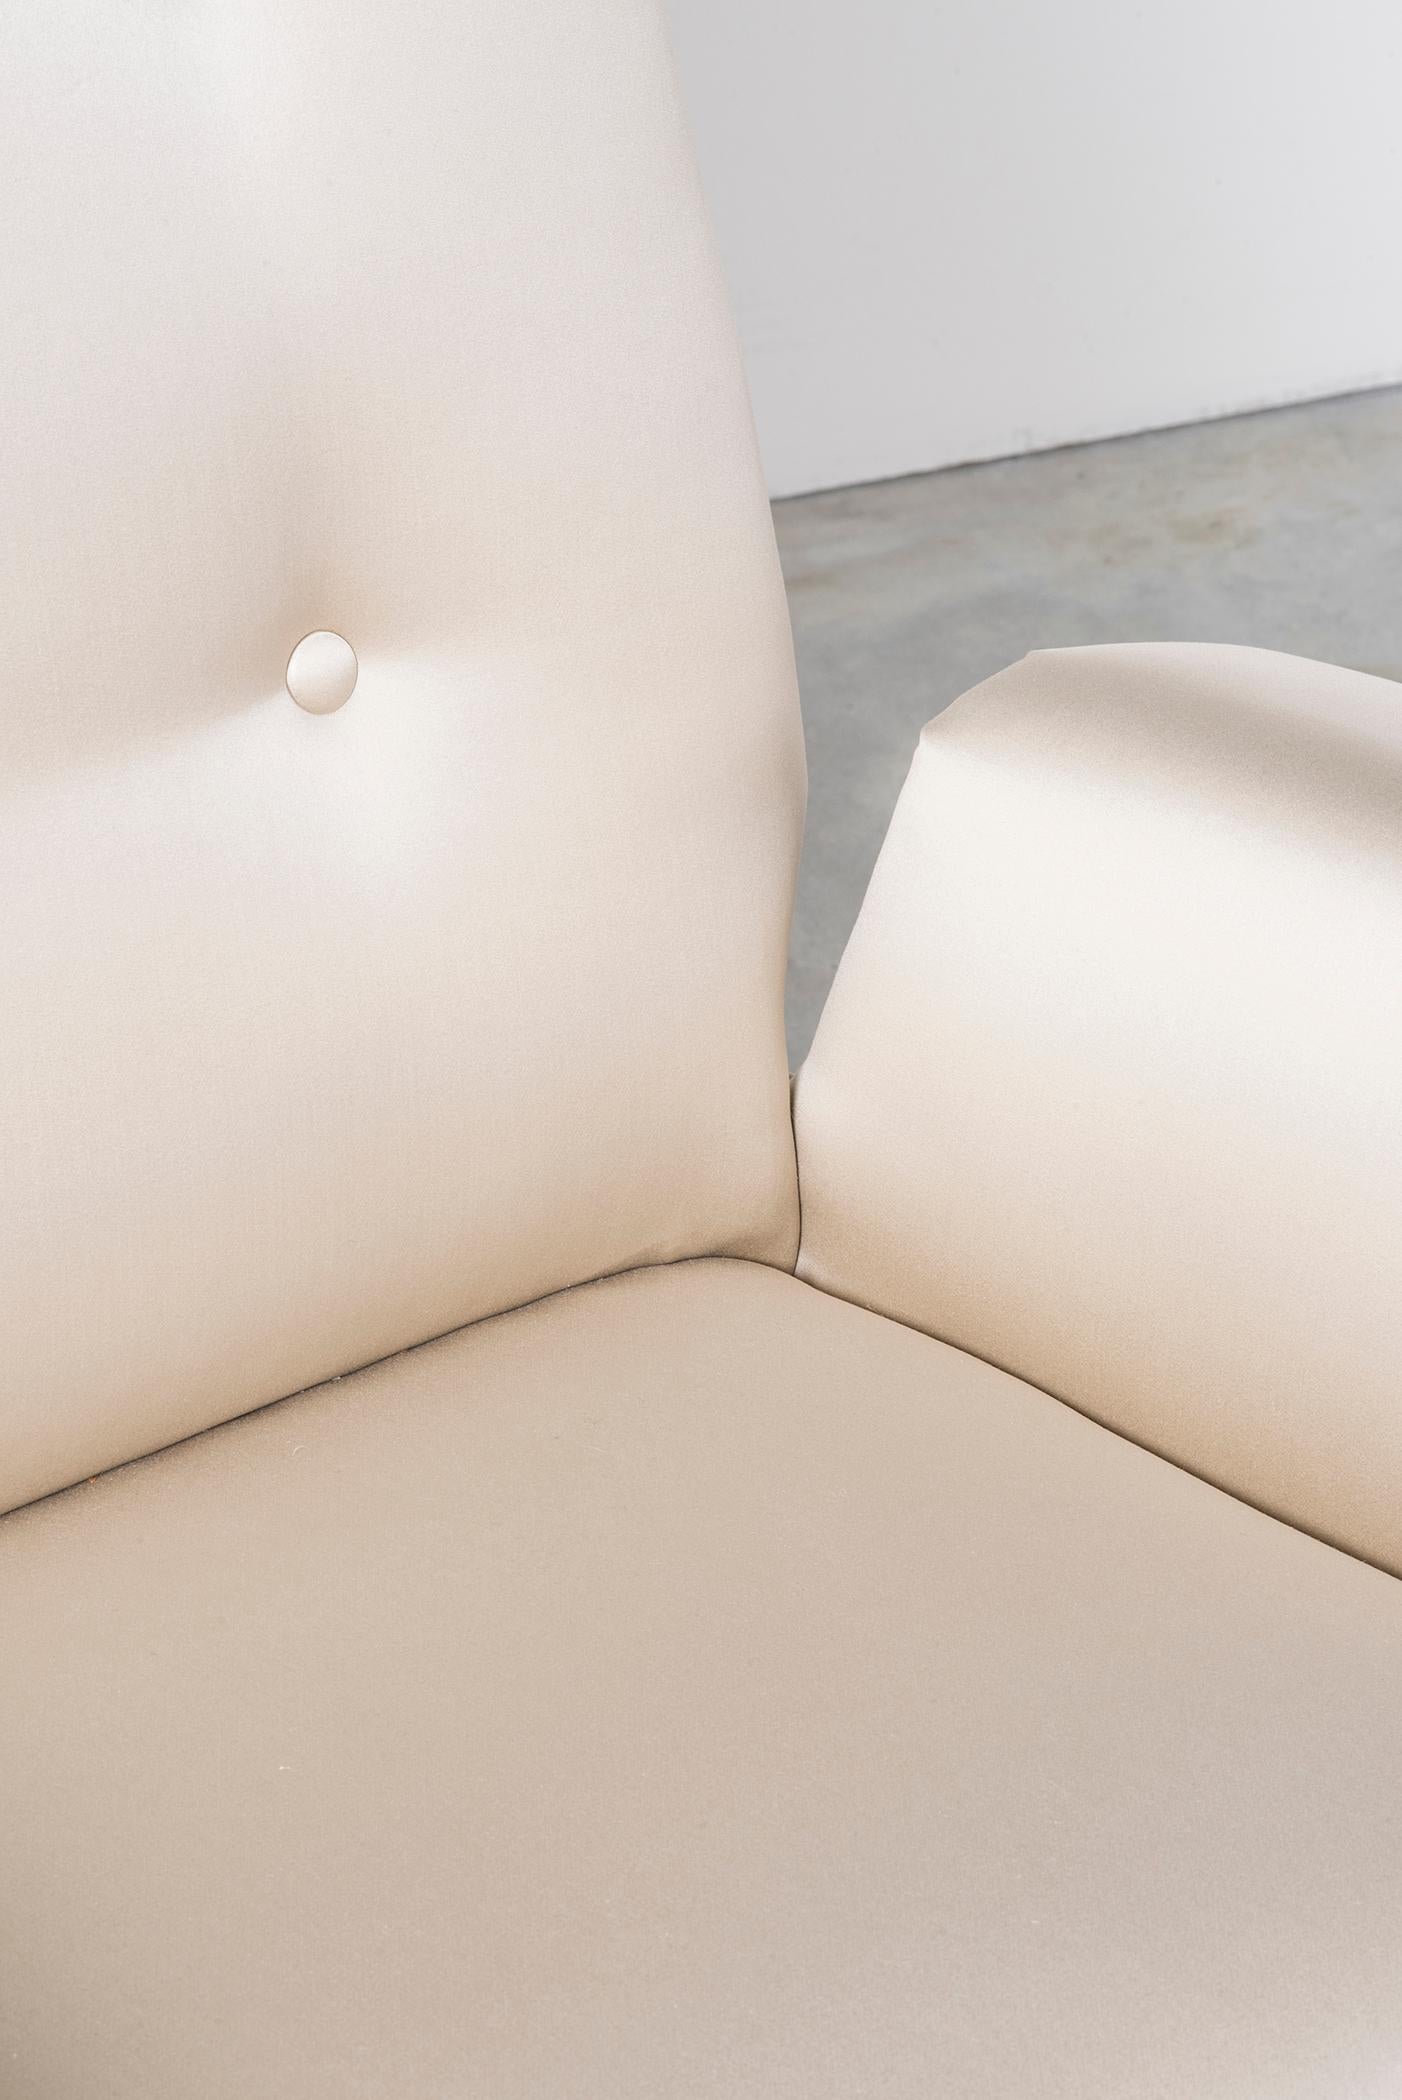 Mid-20th Century Set of Two White Armchairs by Martin Eisler and Carlo Hauner For Sale